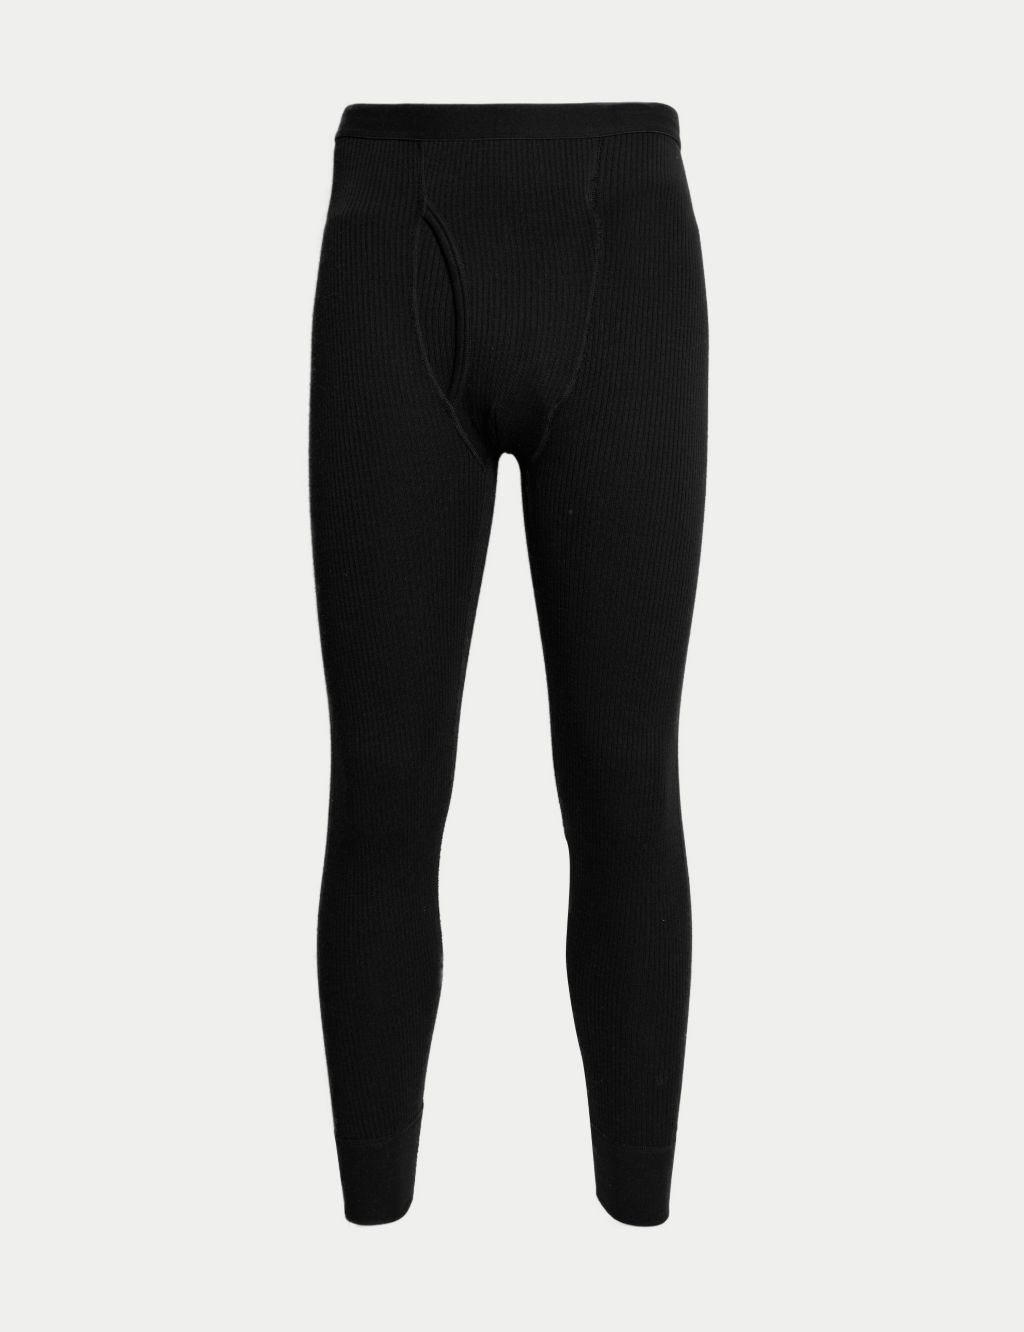 M&S 2 Pack Thermal Leggings Supersoft Base Layer Charcoal Plus